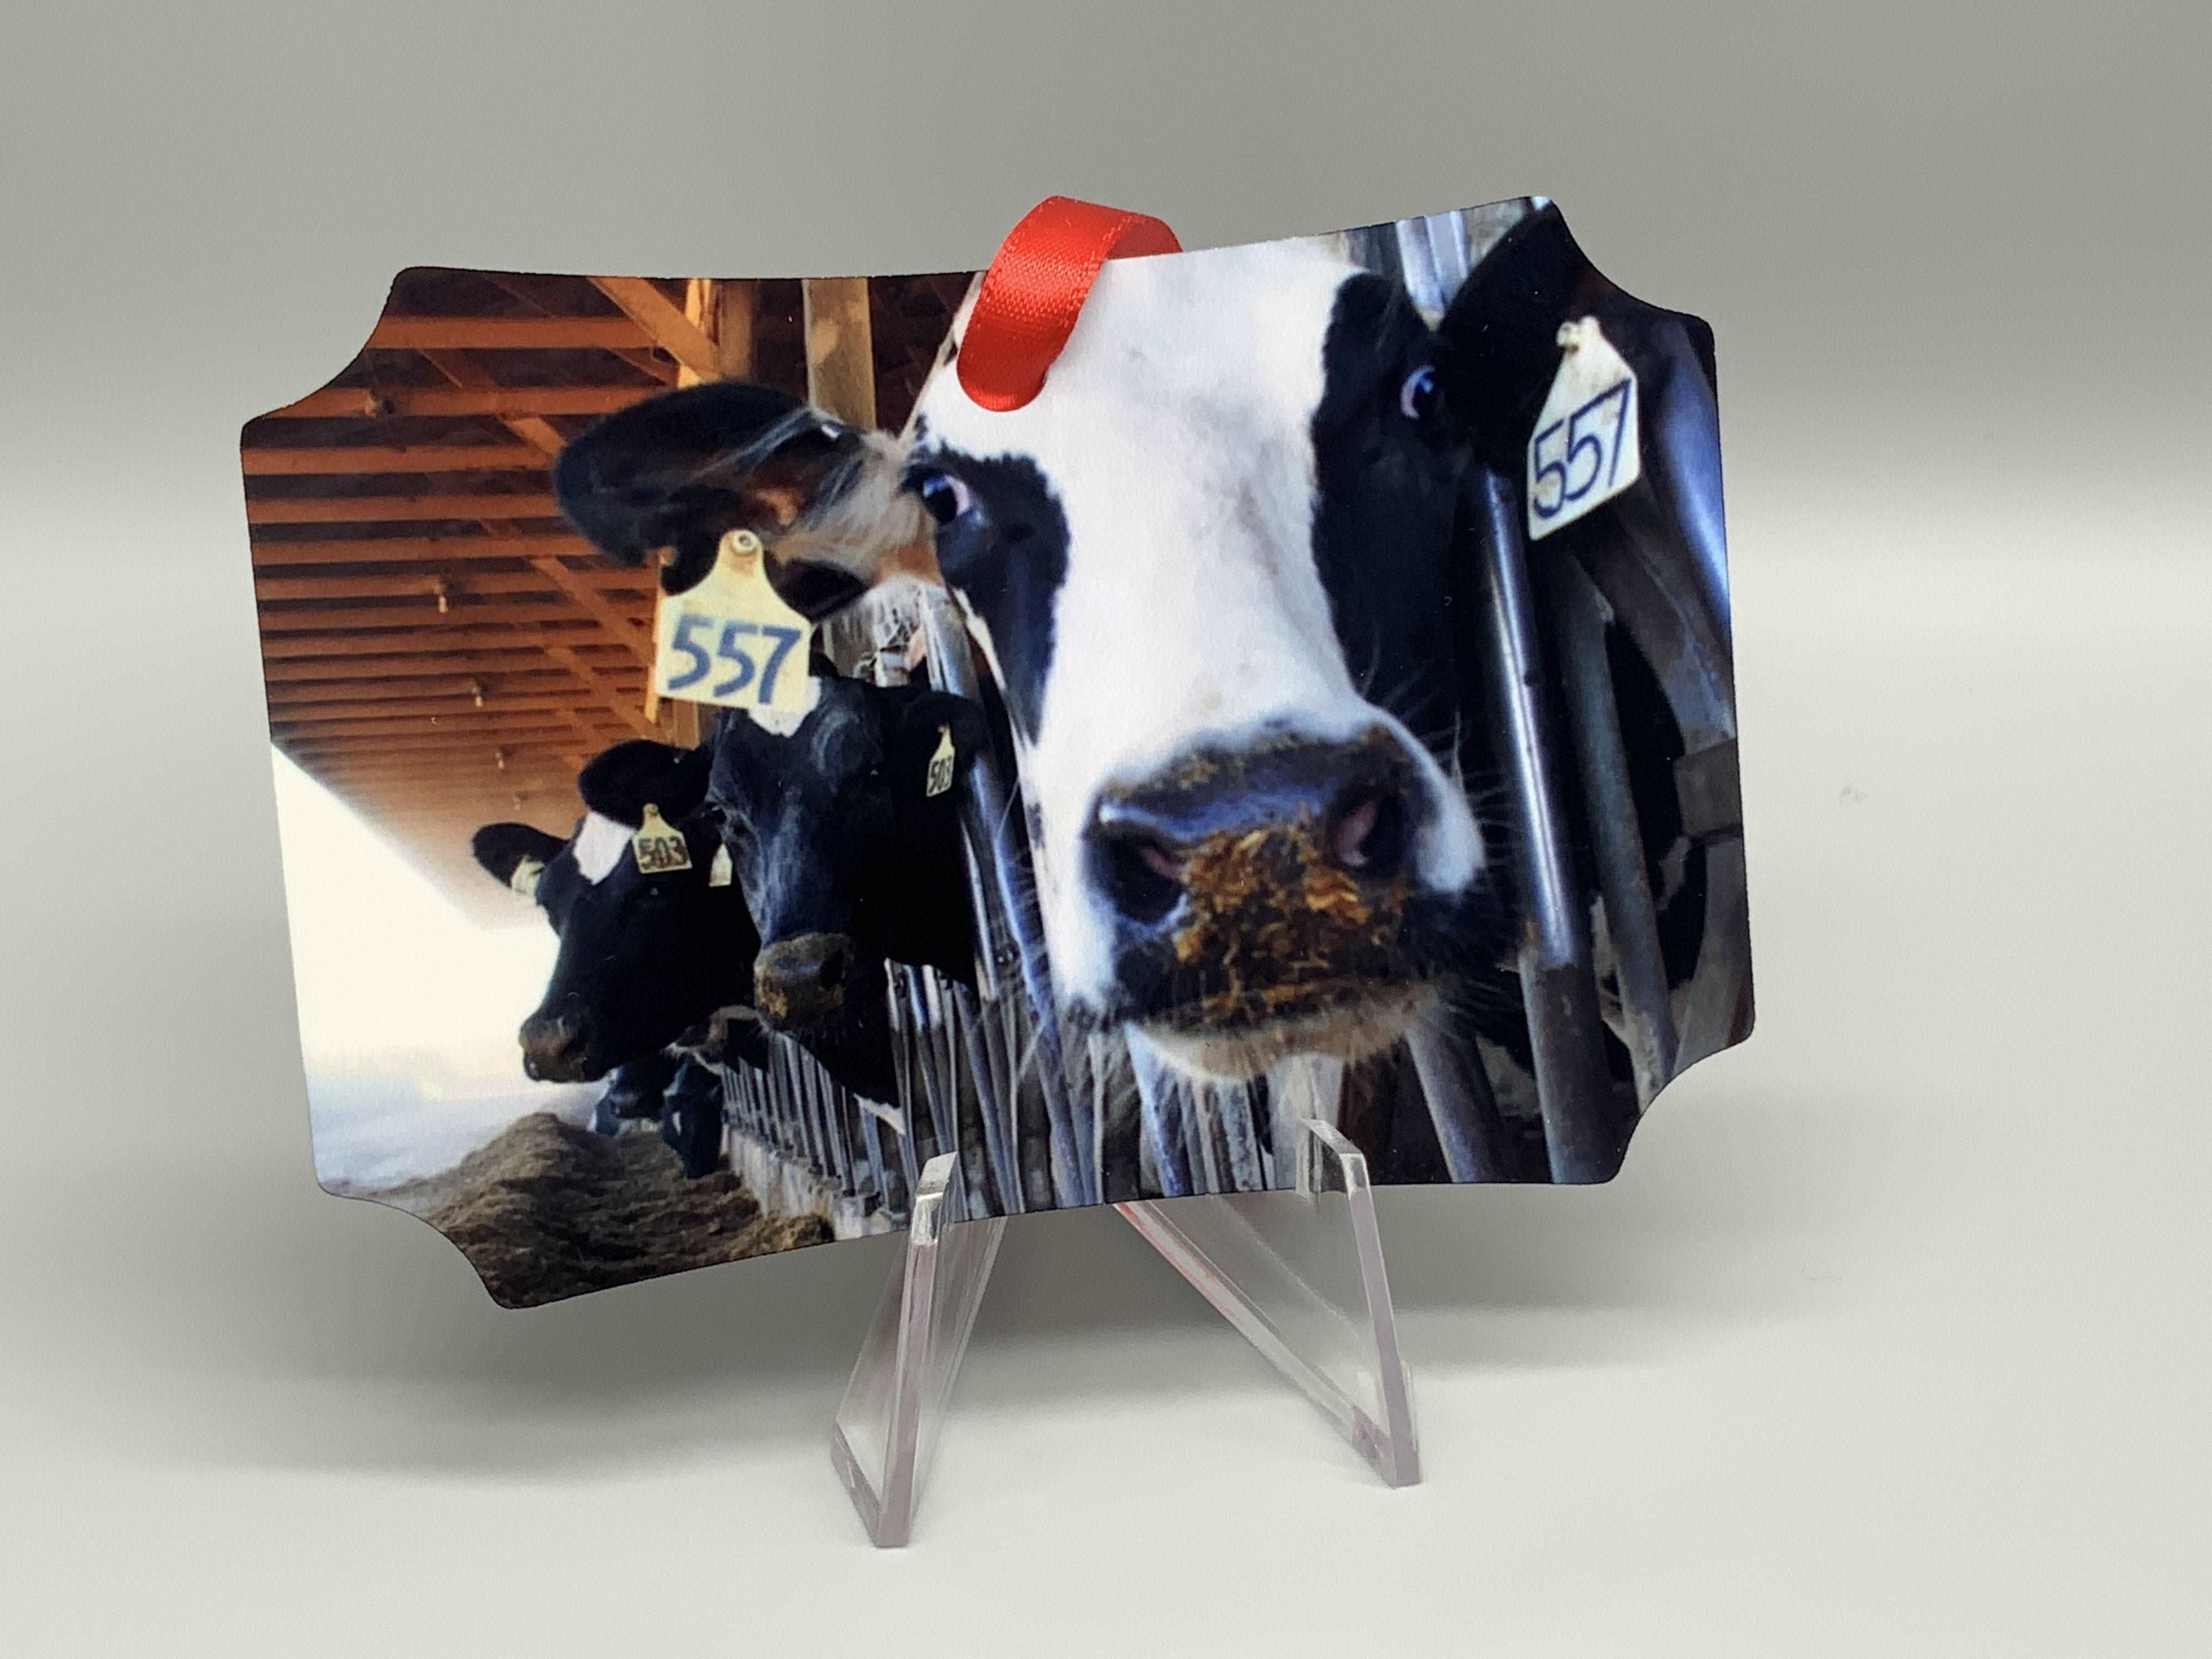 Cow Ornament - Turnmeyer Galleries